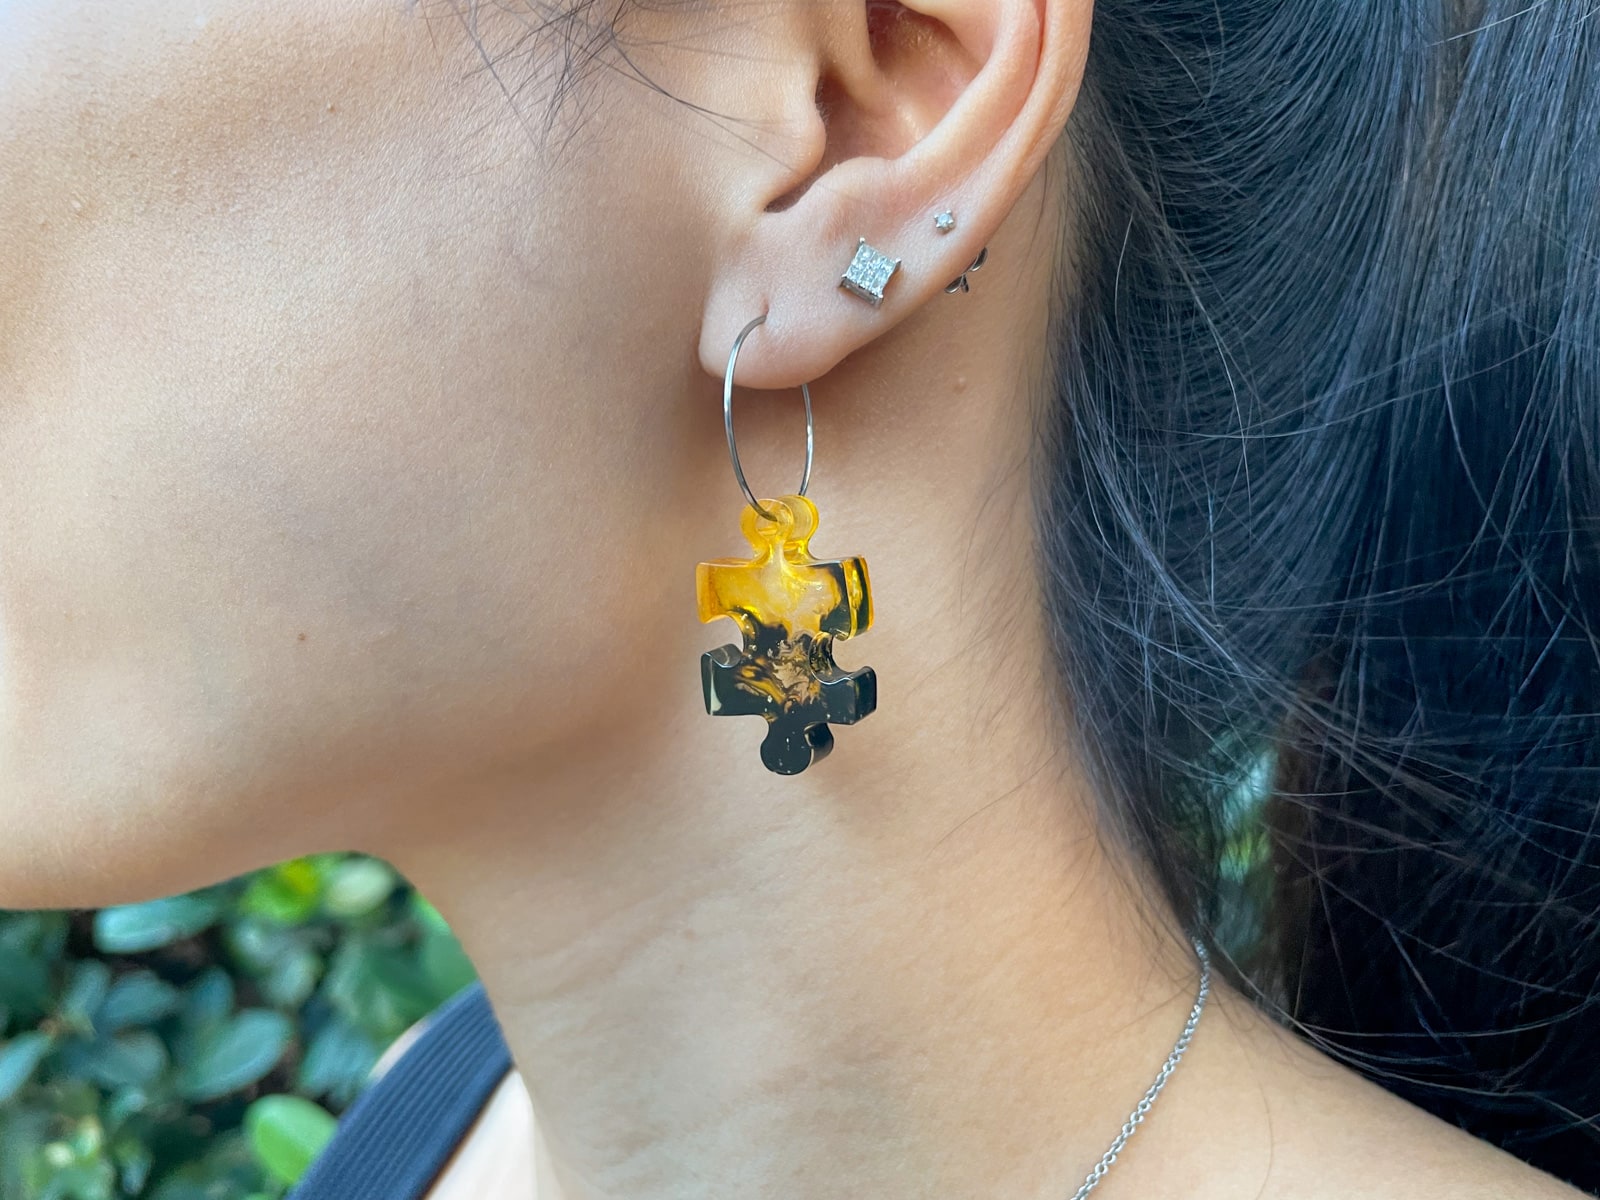 A close-up of a woman’s ear with two silver earrings in the upper lobe, and a silver hoop earring with a yellow and black puzzle-shaped resin drop in the lower lobe.